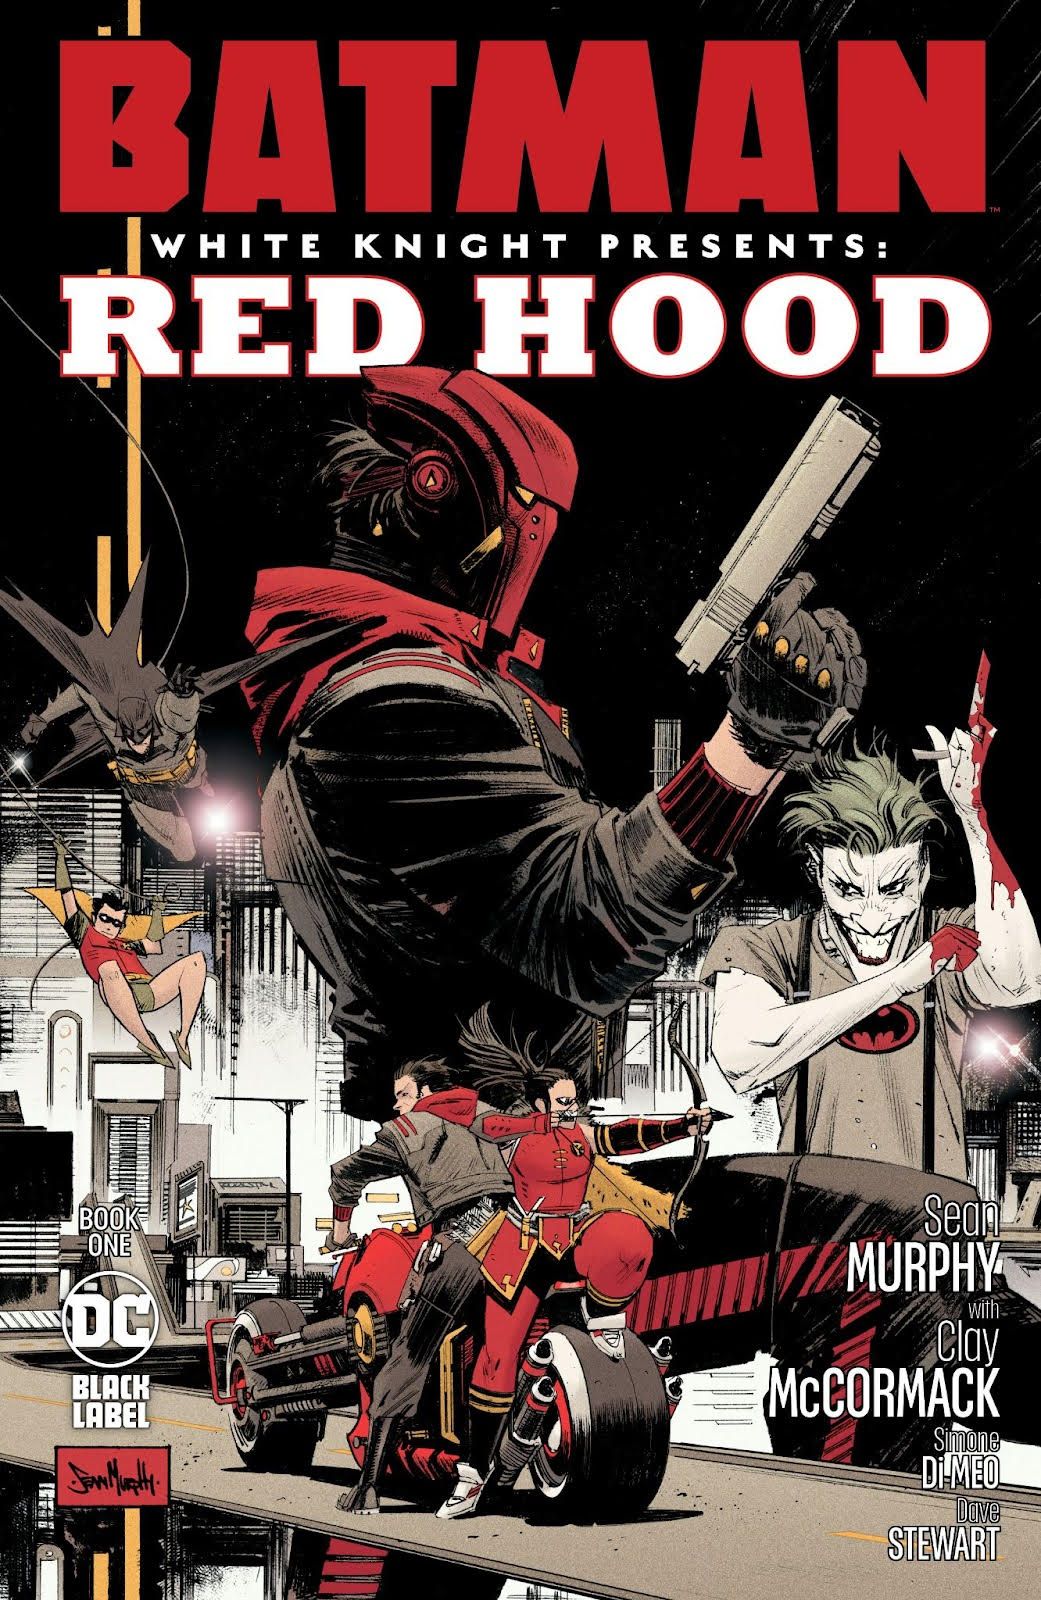 DC's White Knight's Universe Expands with Red Hood Spinoff Series